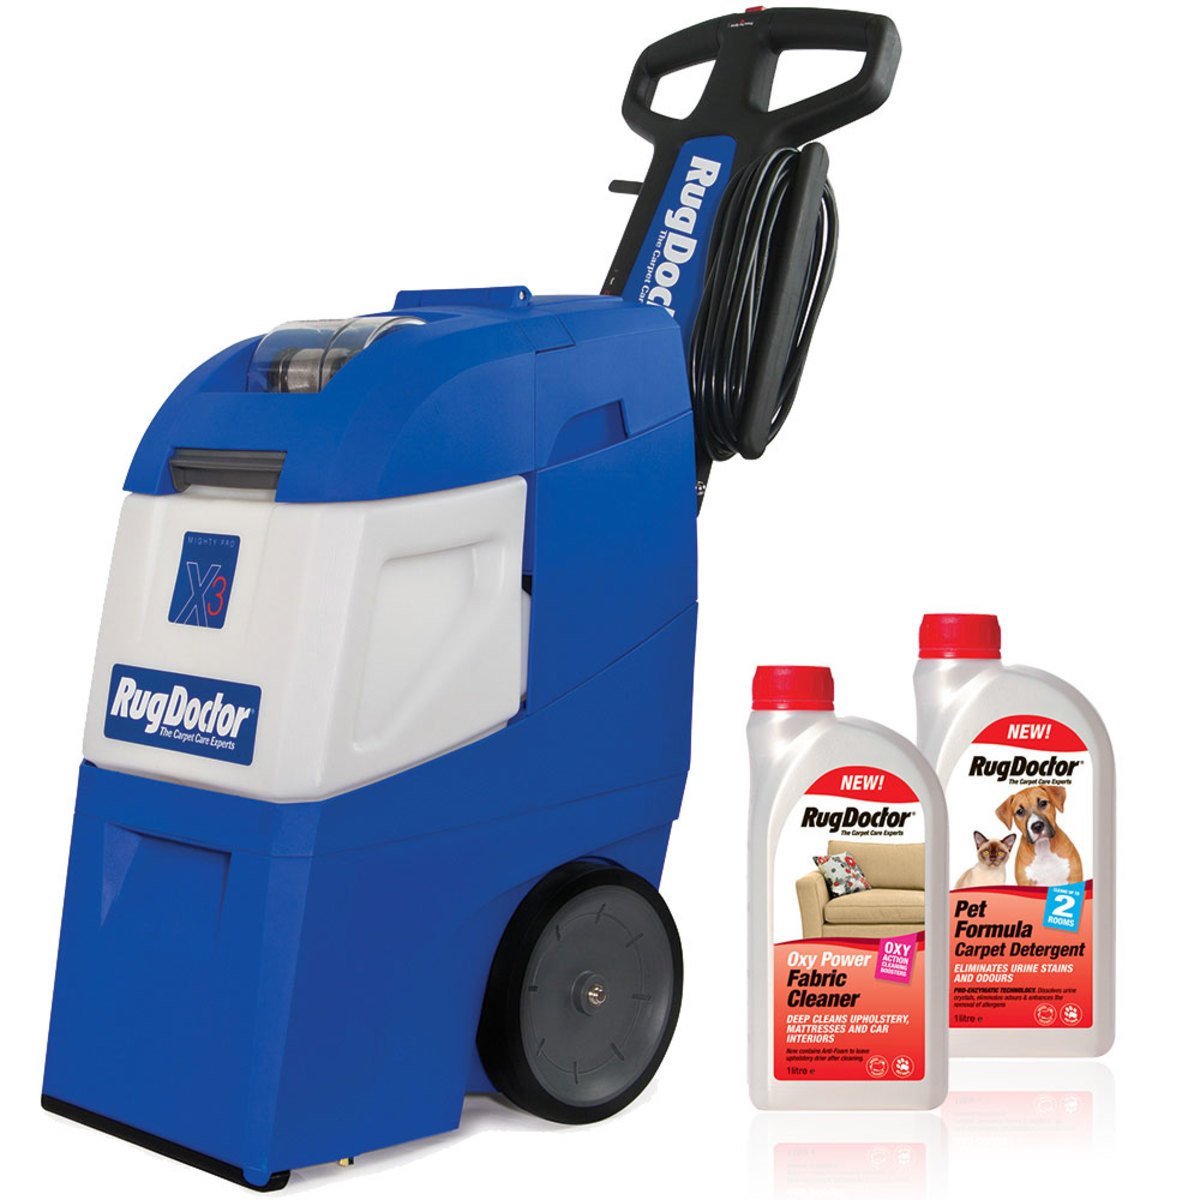 Rug Doctor Mighty Pro X3 Carpet Cleaner With Pet Formula & Oxy Power Detergents - Signature Retail Stores